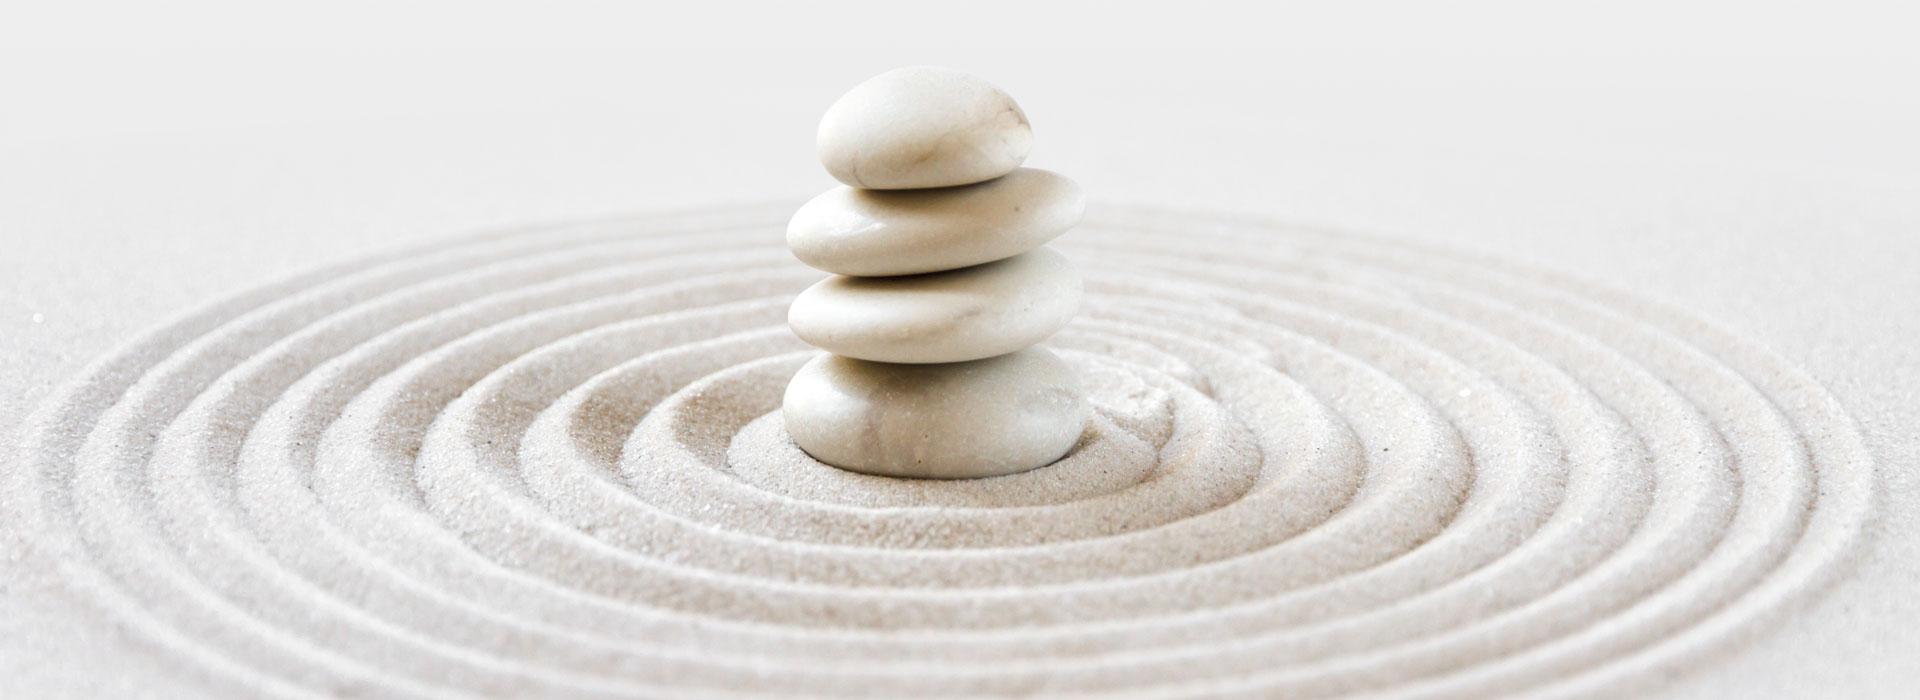 Sand Zen Garden with pile of smooth river stones